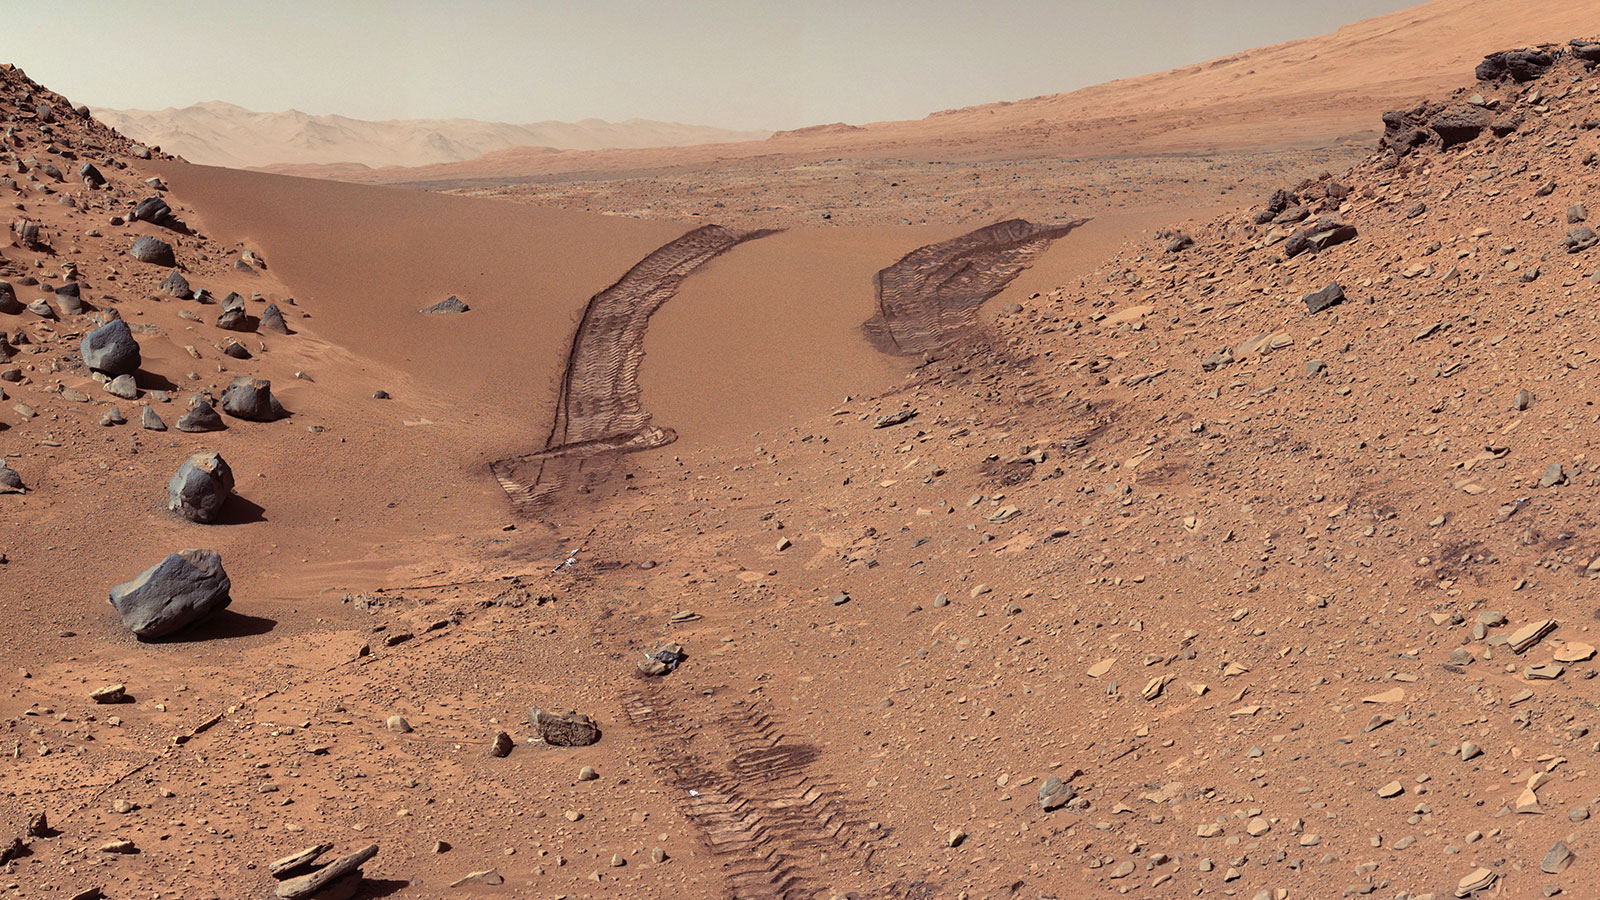 Deep tire tracks are visible in the Martian sand where the Curiosity rover crossed over a dune on Mars.